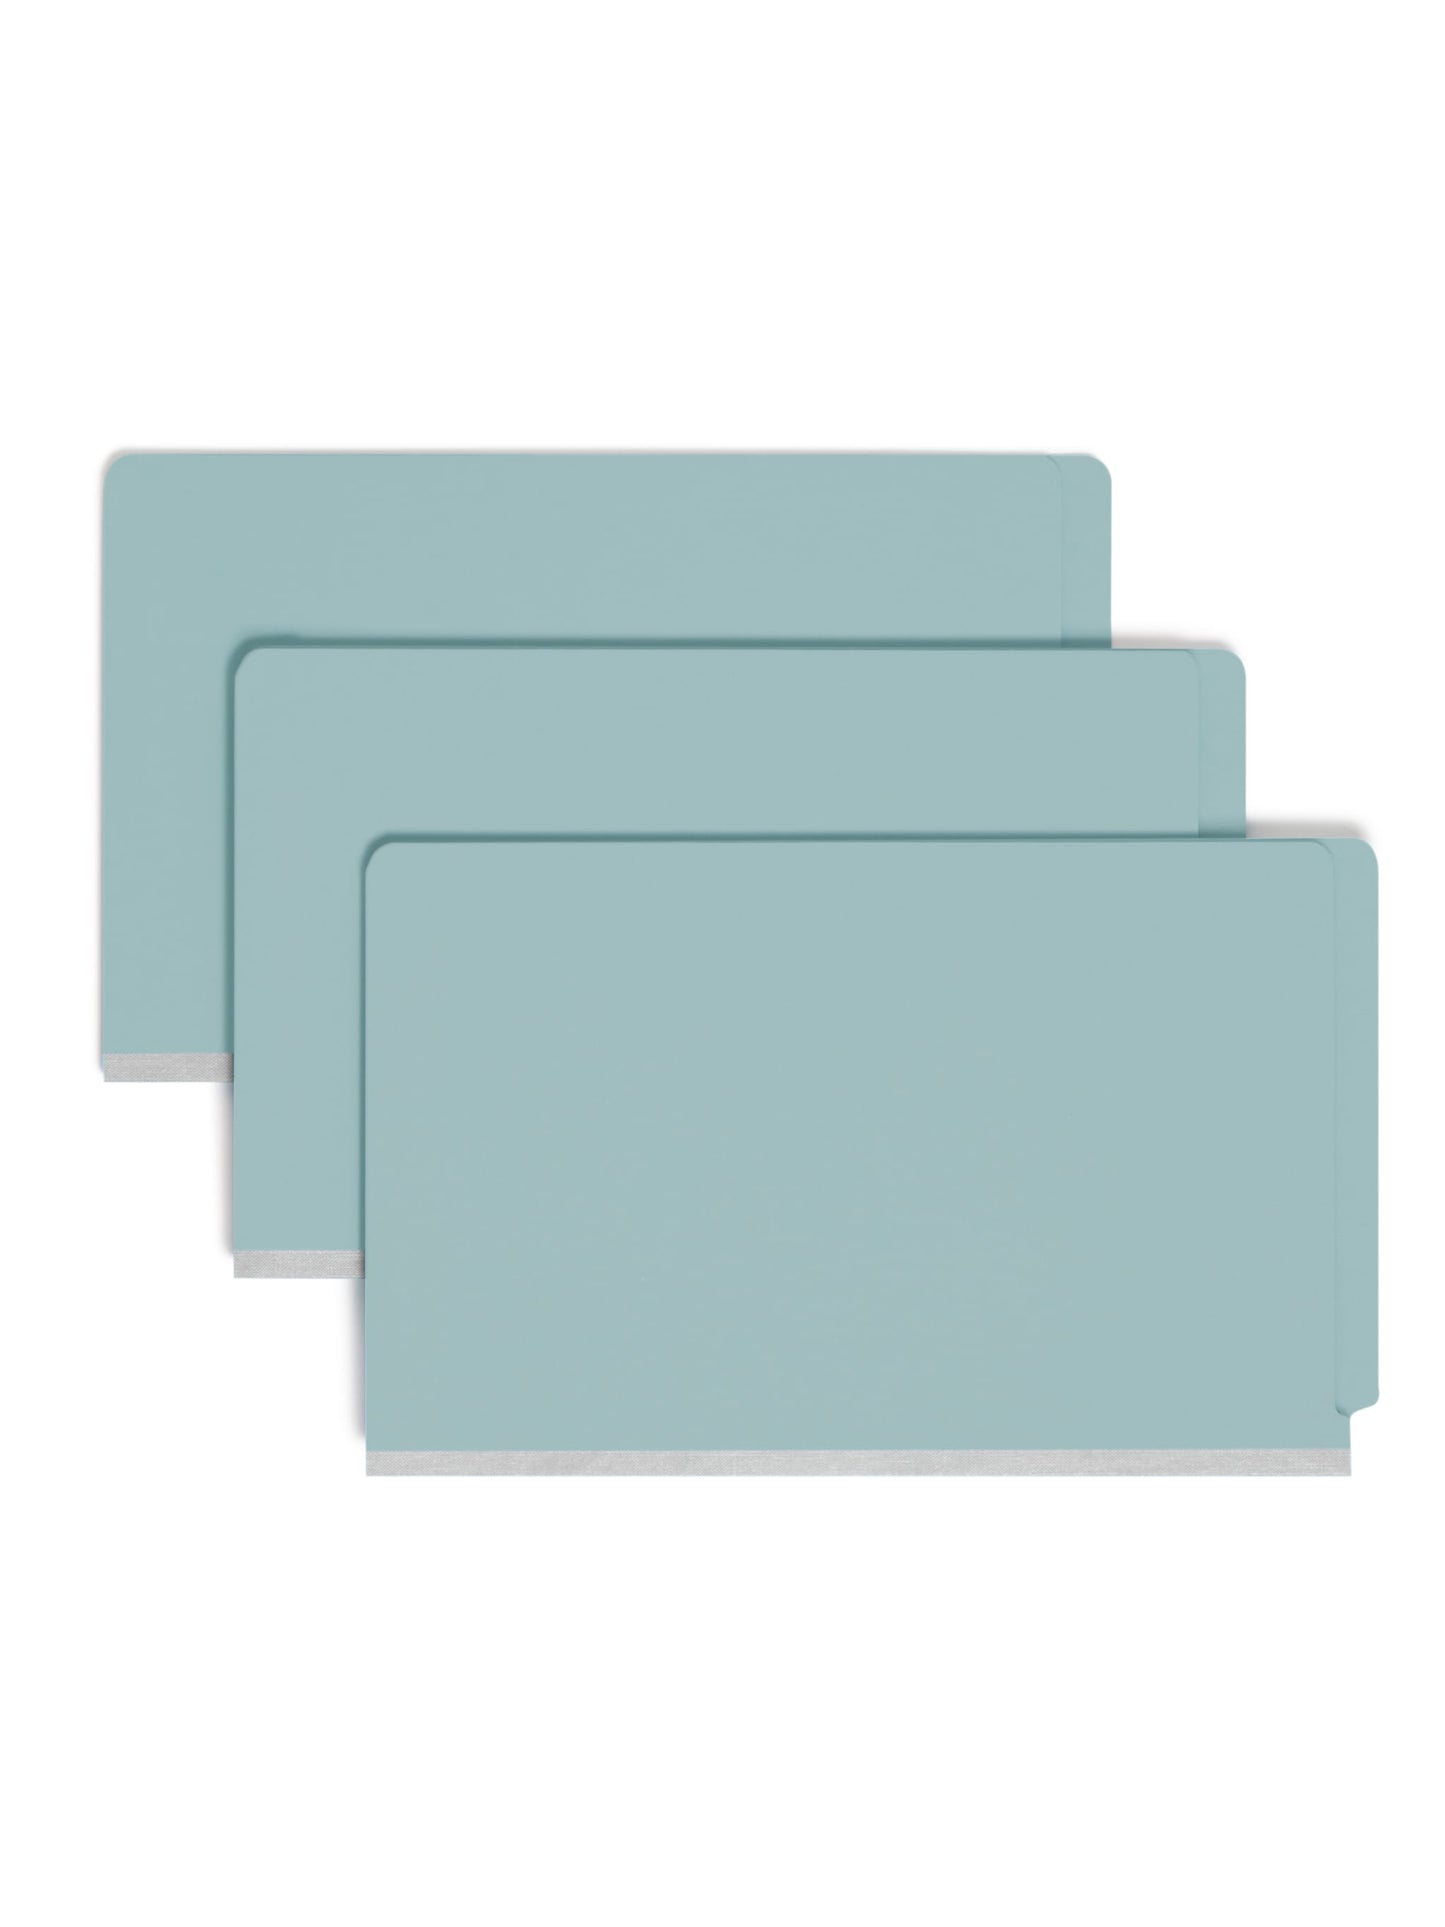 SafeSHIELD® Pressboard End Tab Classification File Folders, Straight-Cut Tab, 2 inch Expansion, 2 Divider, Blue Color, Legal Size, Set of 0, 30086486297814